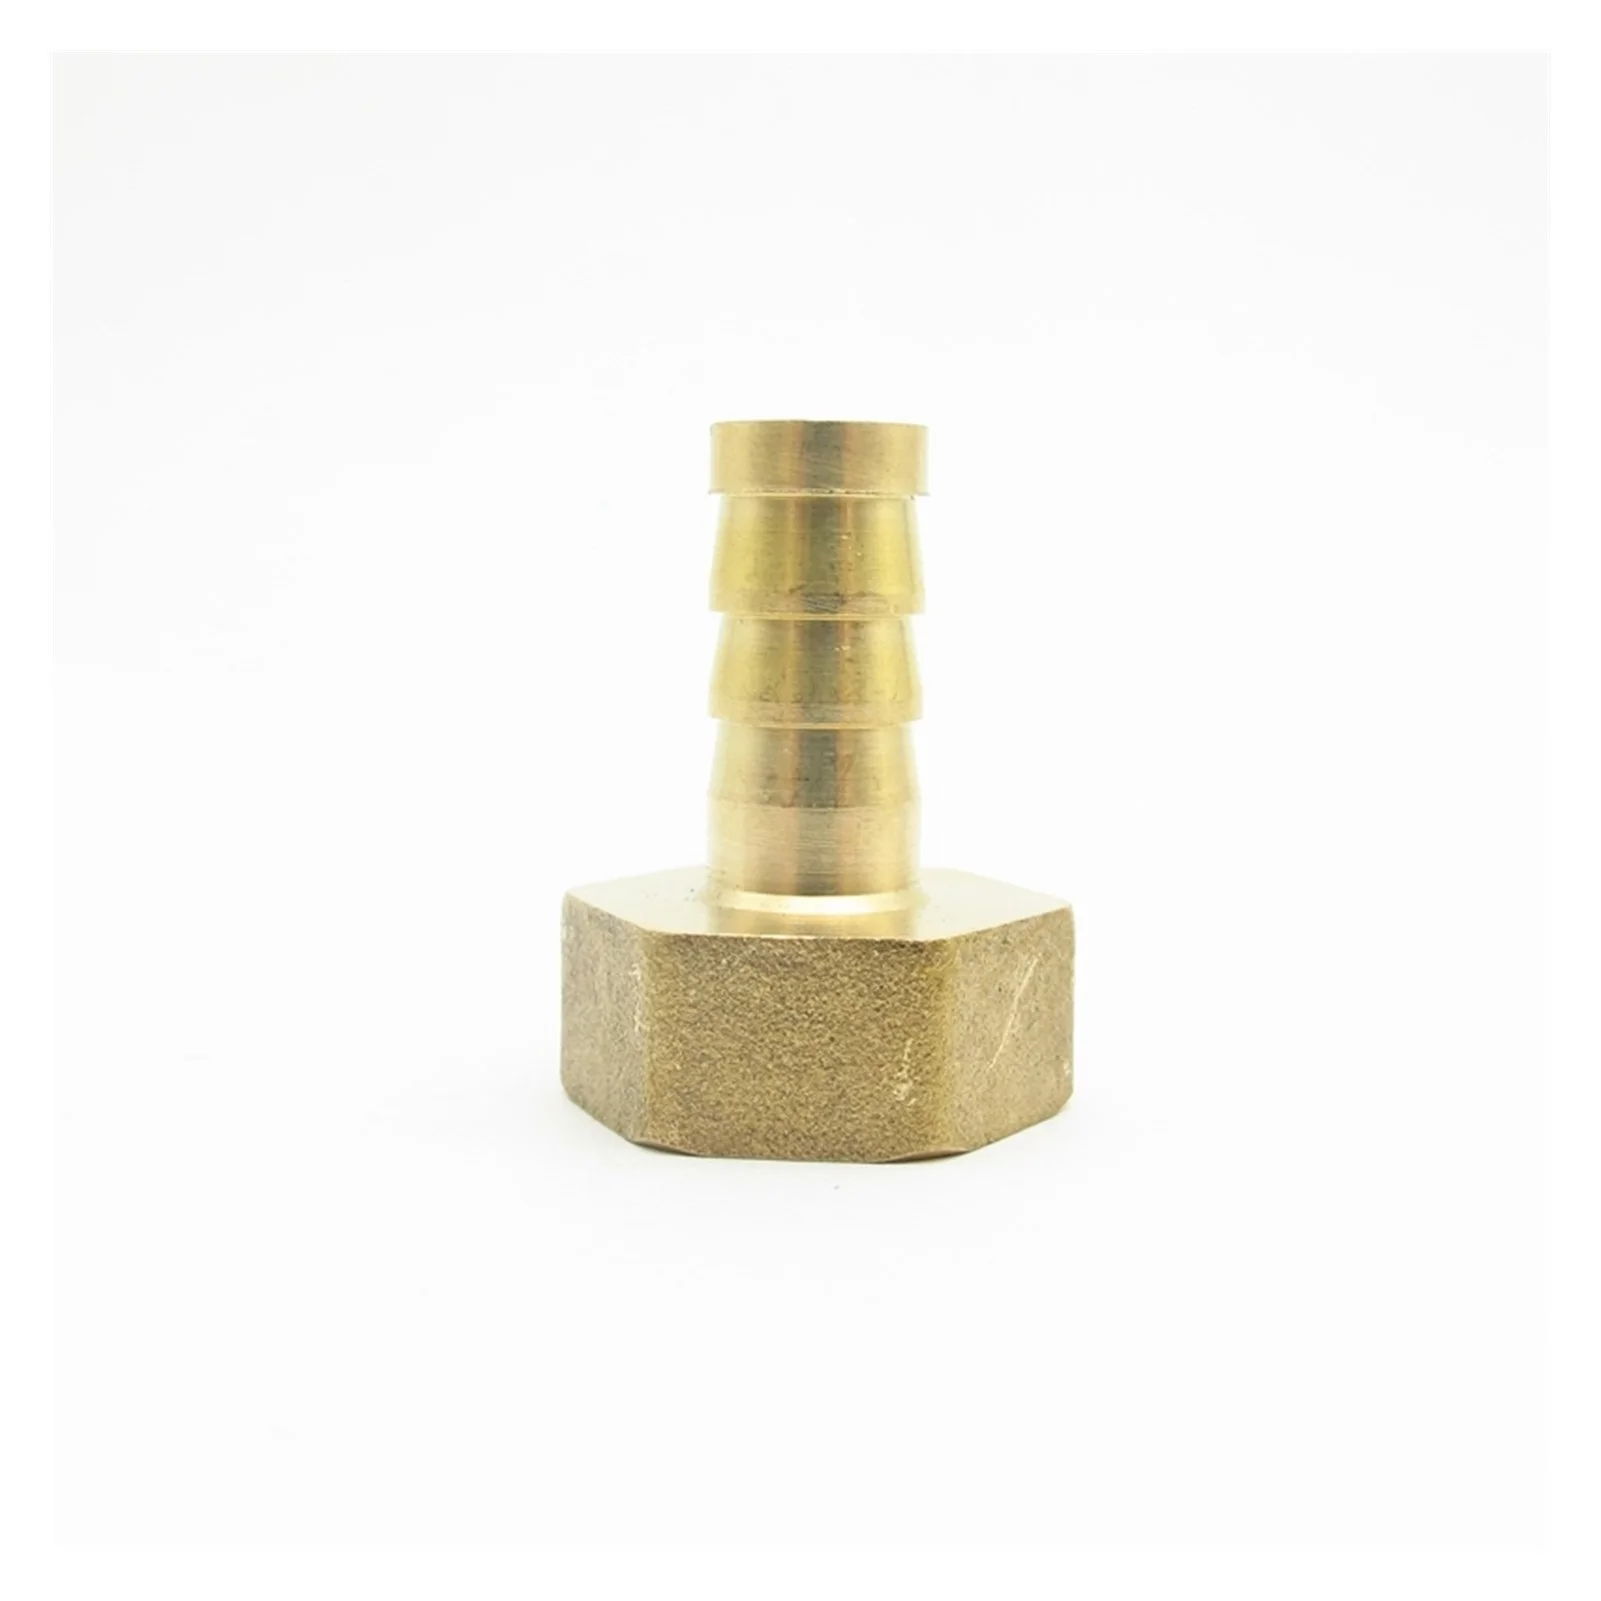 

1/2" Female Thread Brass Barbed Pipe Fitting Connector Adapter,6mm 8mm 10mm 12mm 14mm 16mm 19mm 25mm Hose Barb,